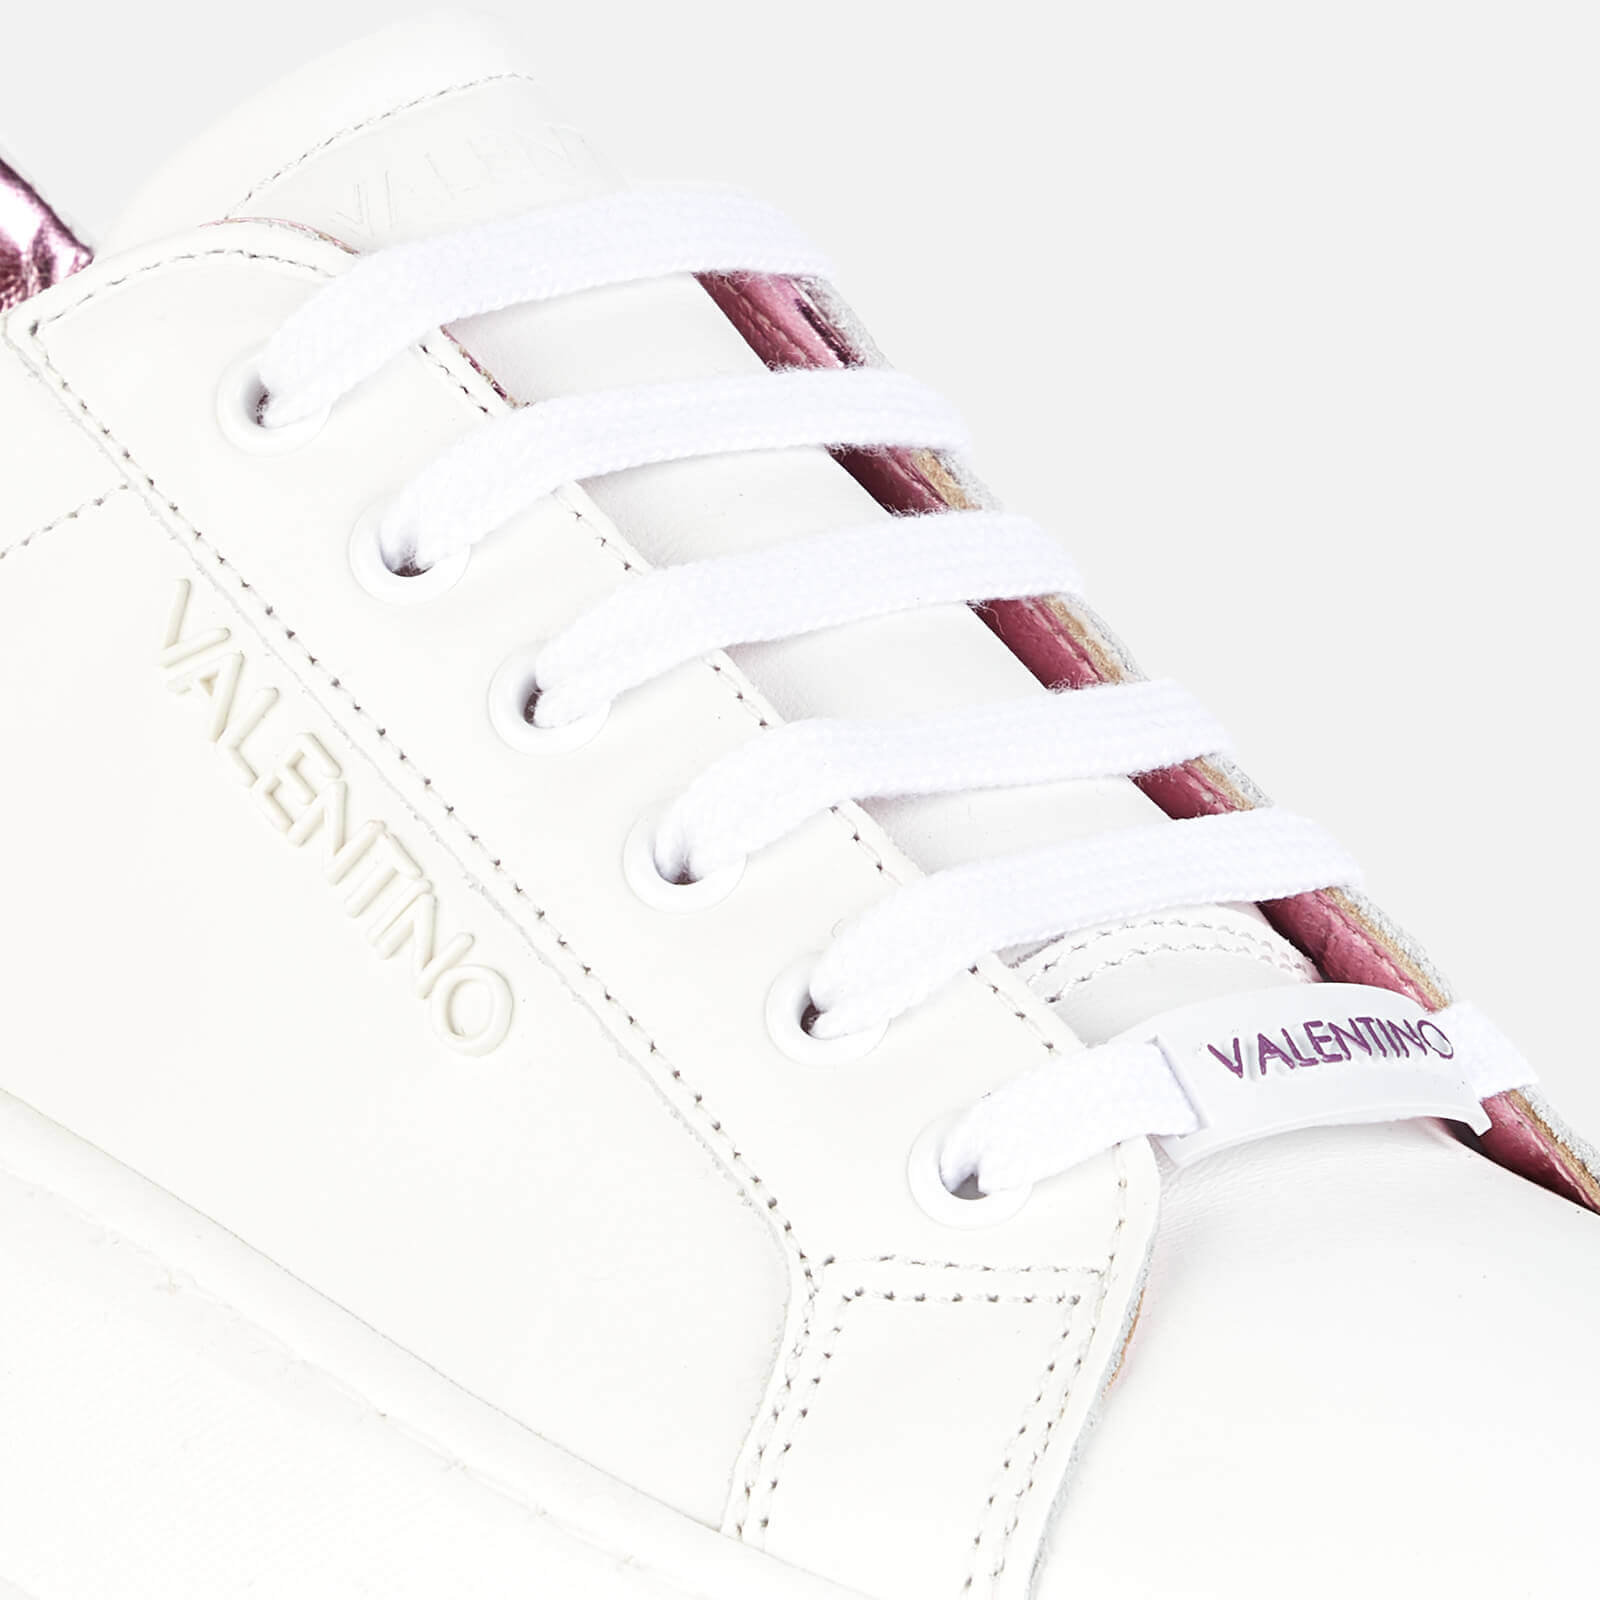 Valentino Shoes Women's Leather Flatform Trainers - White/purple - Uk 3 91190785 010 Mens Footwear, White